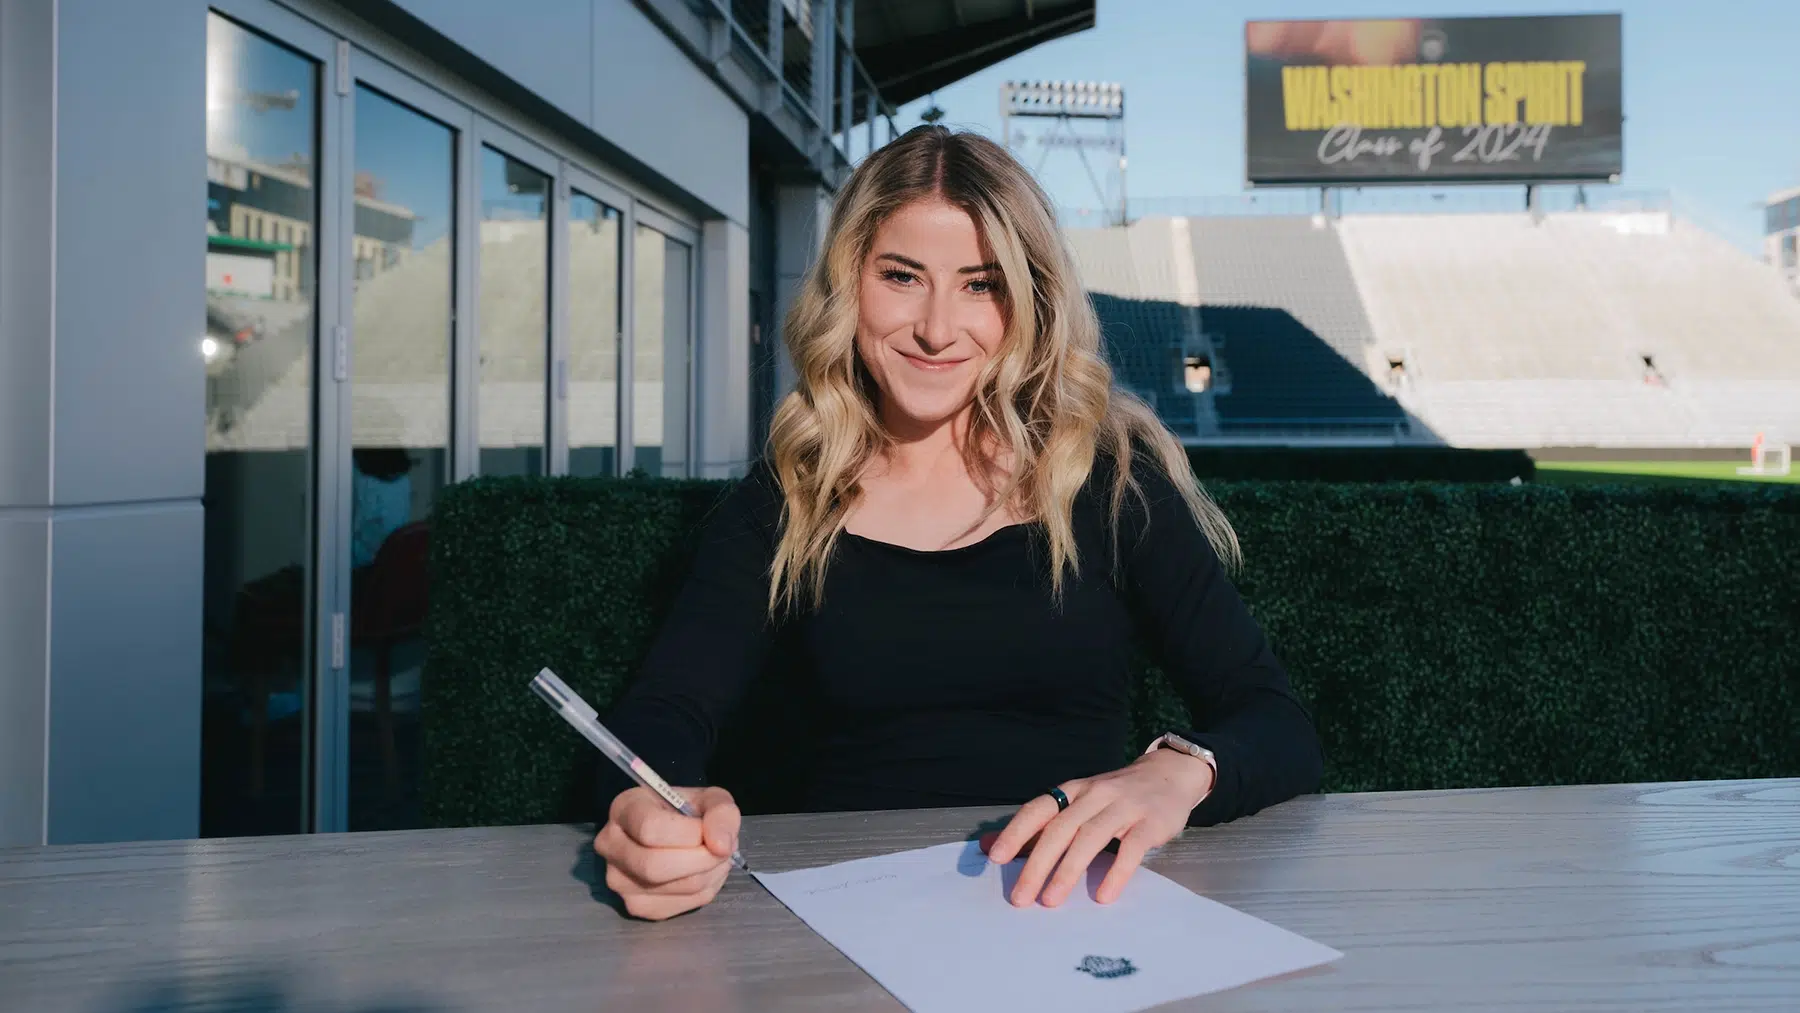 Heather Stainbrook in a black top signs a contract. In the background, Audi Field is seen with "Washington Spirit Class of 2024" on the large stadium screen.